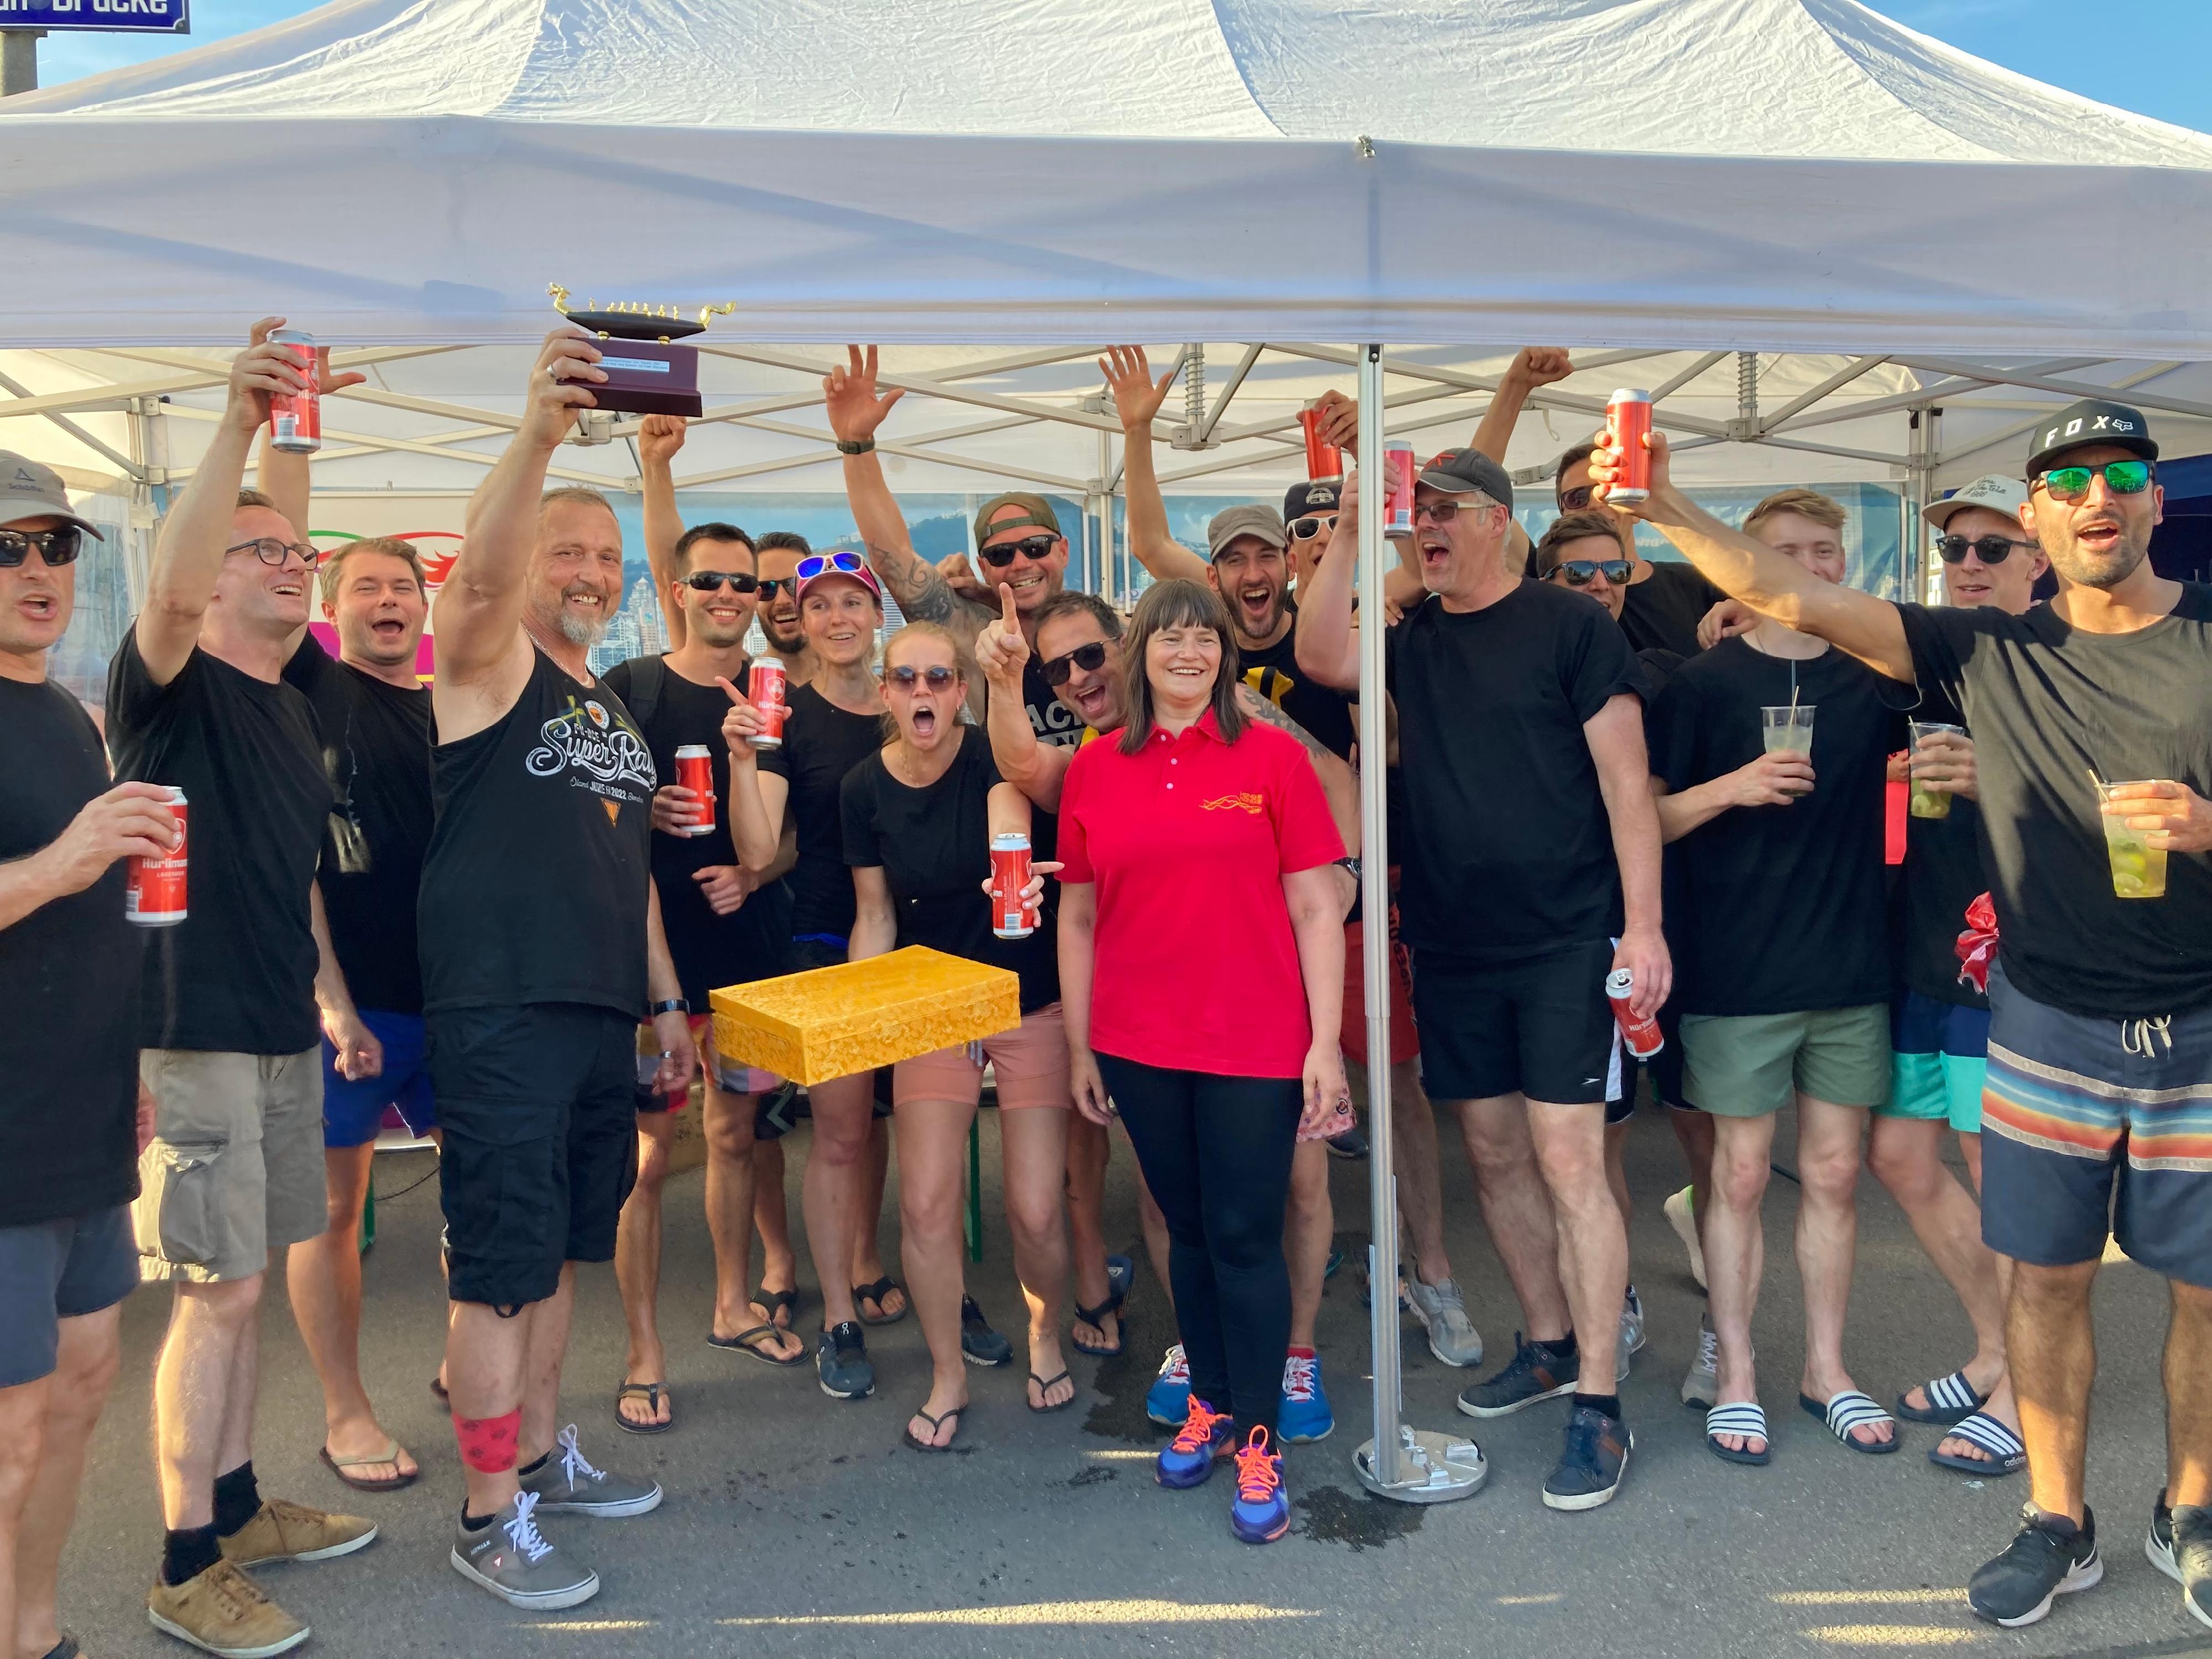 The Hong Kong Economic and Trade Office, Berlin (HKETO Berlin), sponsored the Dragon Boat Race which took place on July 8 (Zurich time) in Switzerland. Photo shows the Head of Public Relations of HKETO Berlin, Ms Stephanie Pall (centre), with one of the winning teams at the prize presentation ceremony.